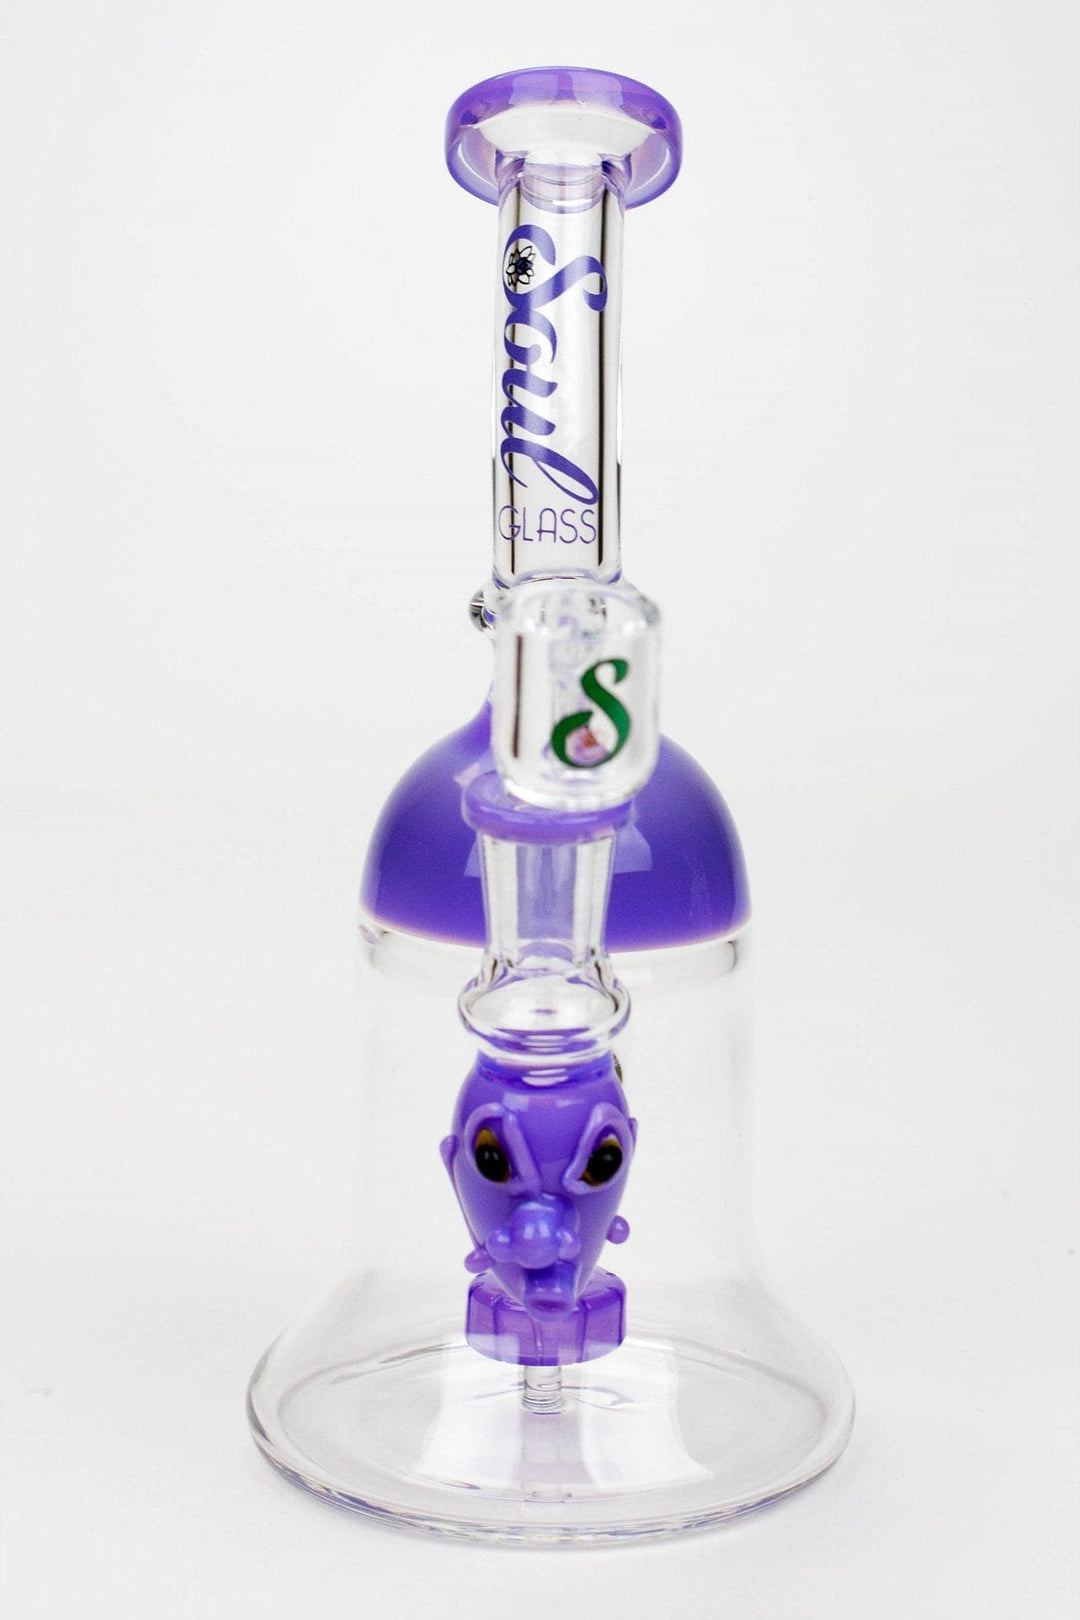 Soul glass 2-in-1 show head diffuser water pipes_10